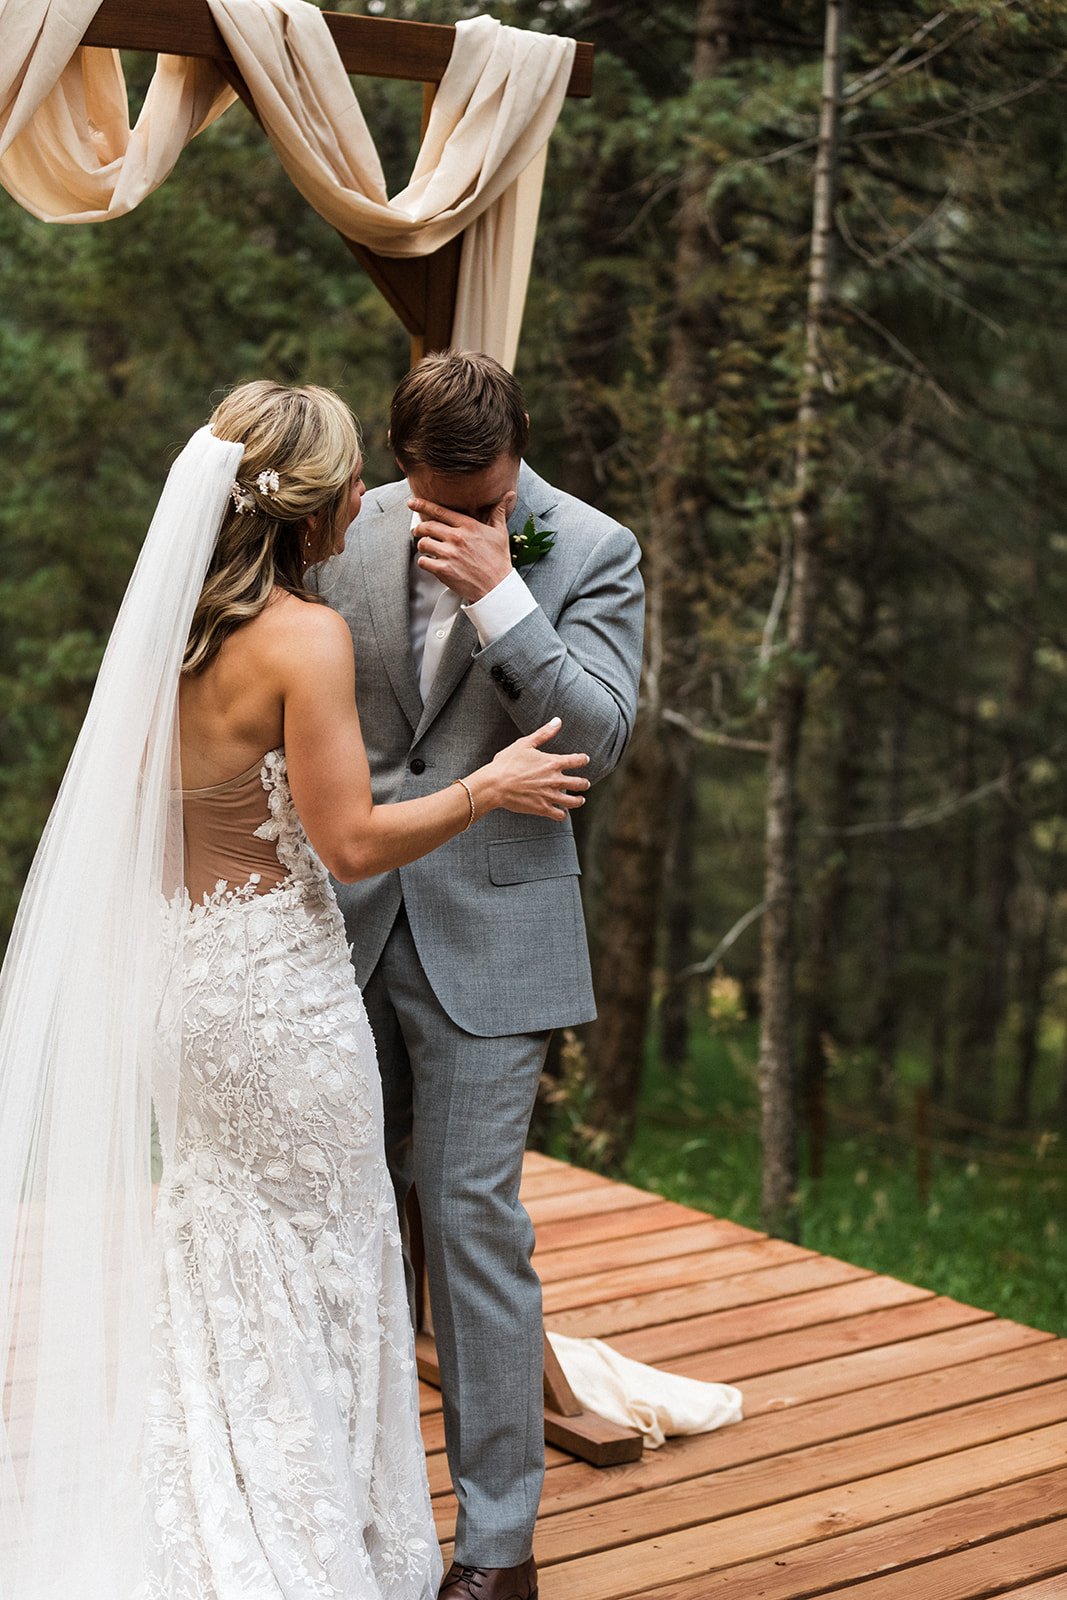  Photograph of a bride wearing Made With Love penny wedding dress, Sara Gabriel veil, and floral hair pieces. She is reaching out to the groom who is wiping tears from his eyes as they exchange vows for their intimate mountain elopement in the woods.